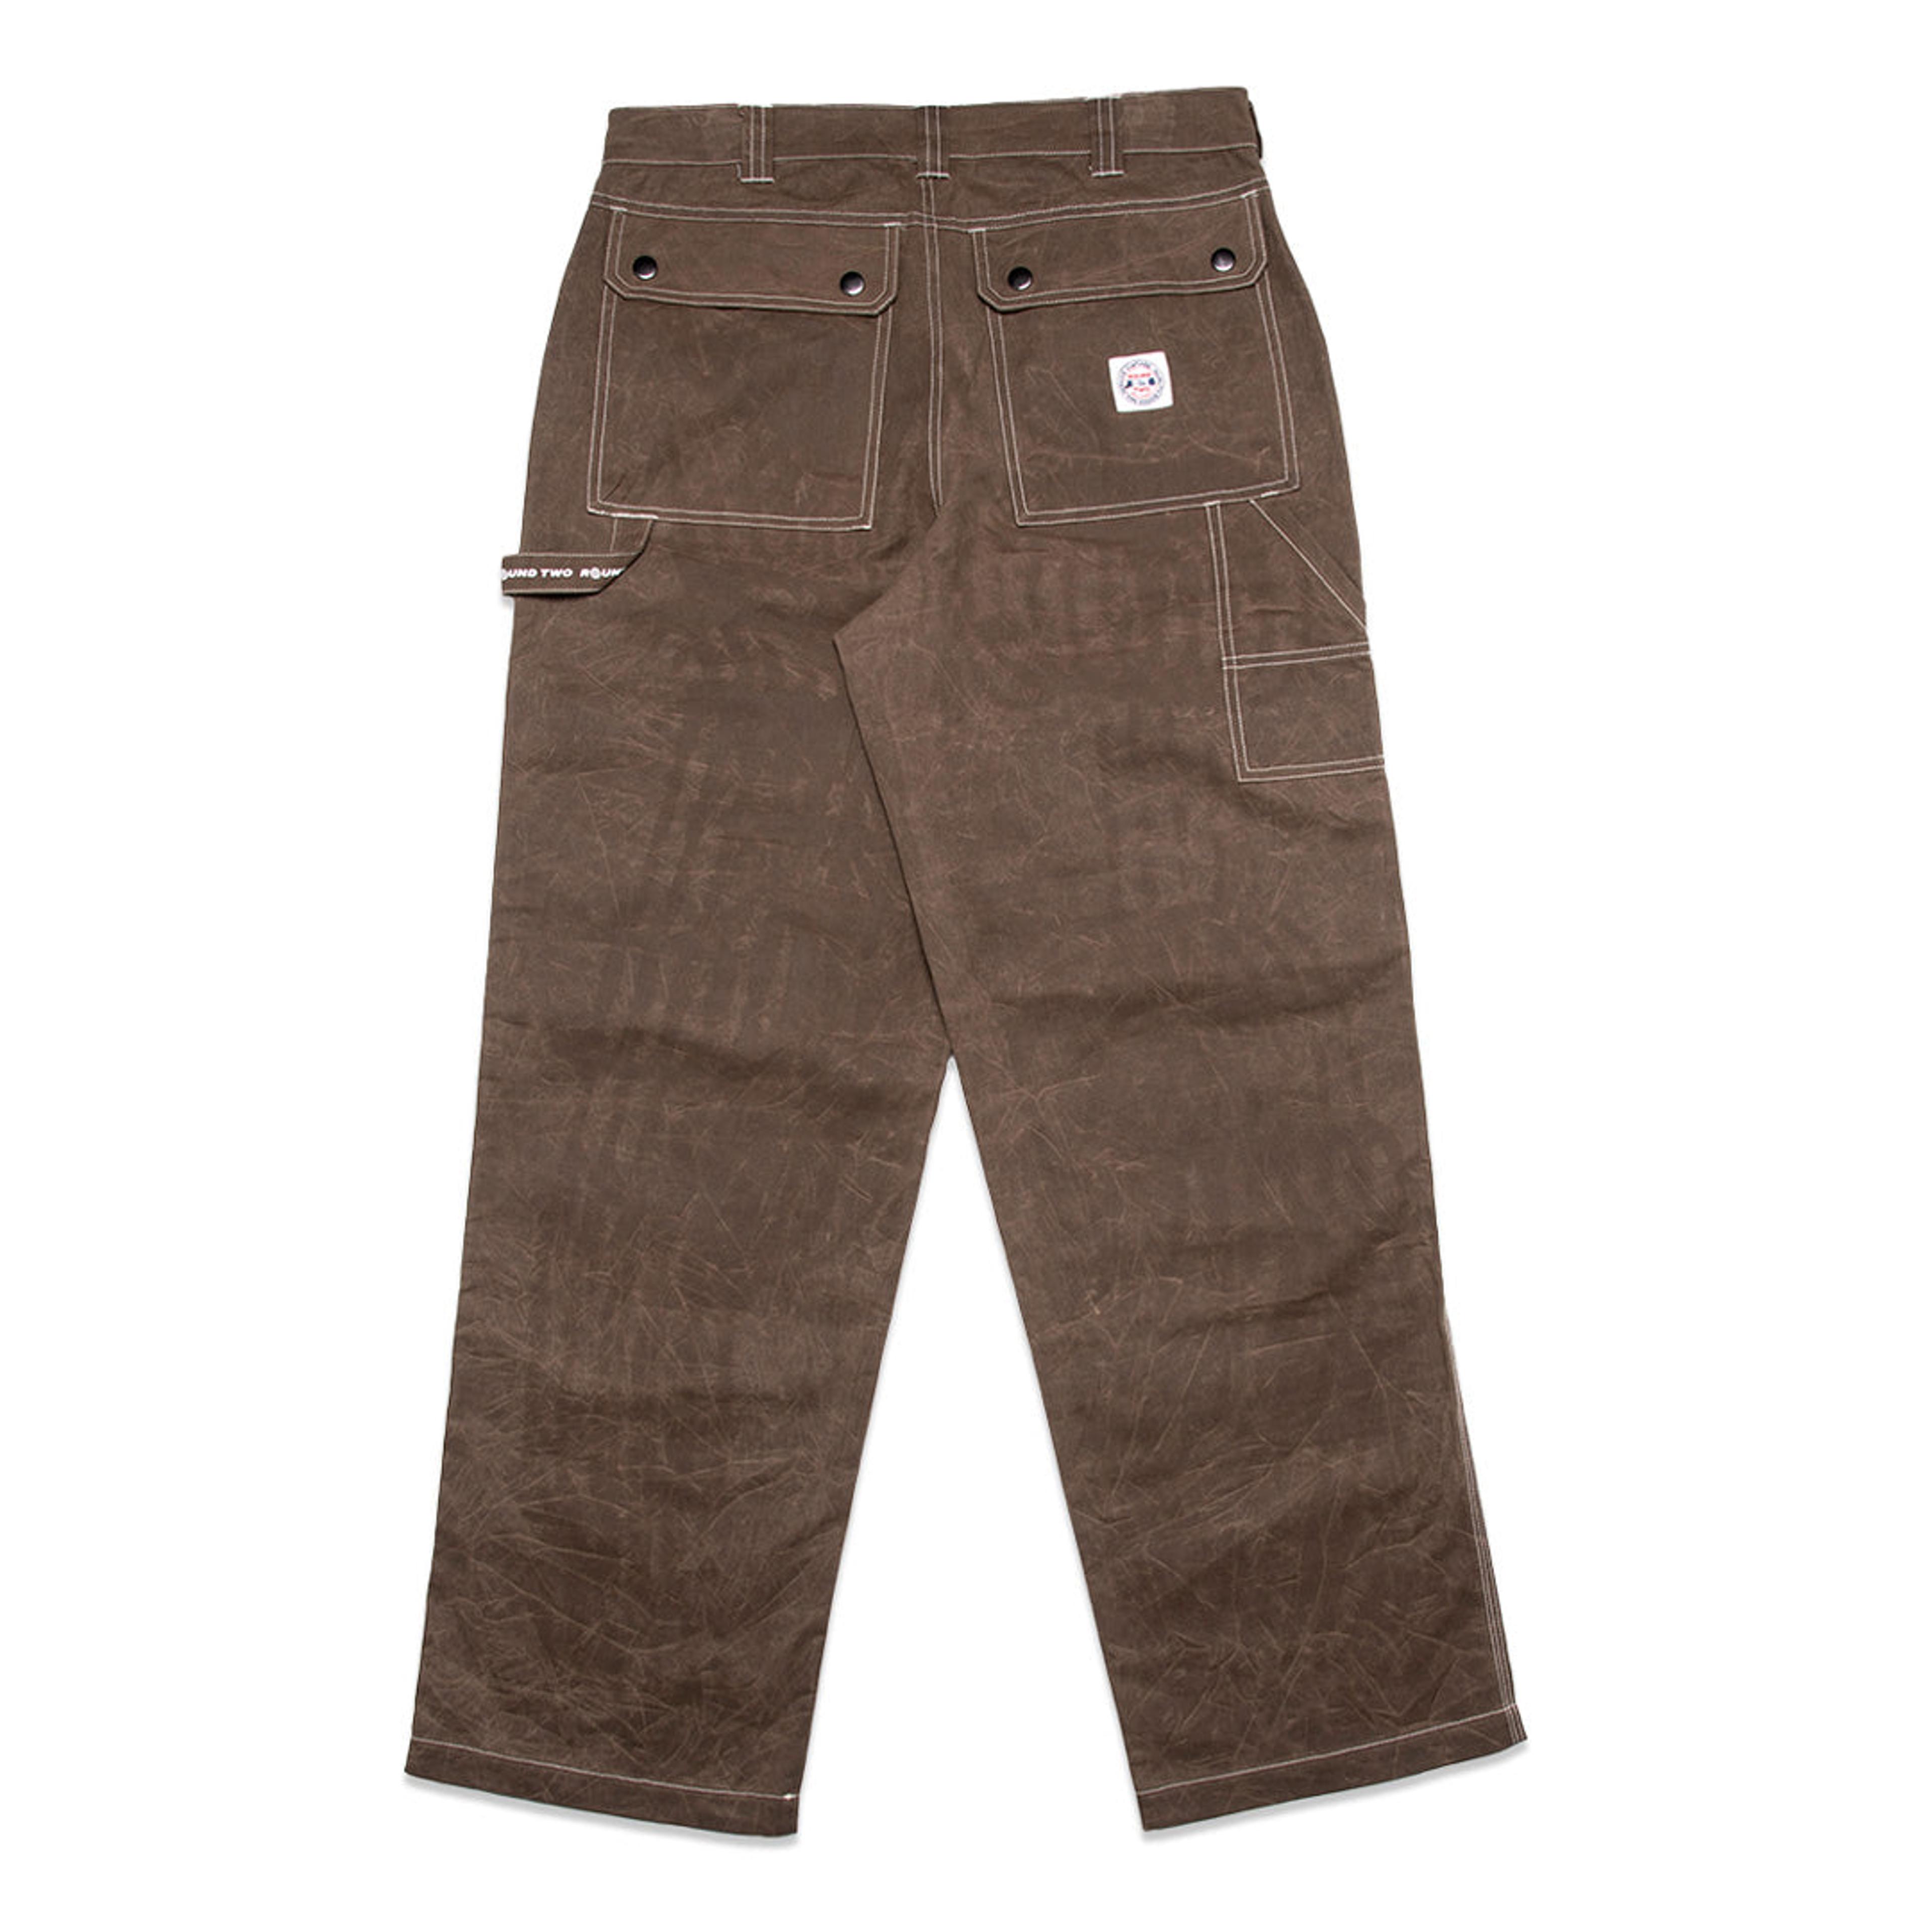 Alternate View 1 of Waxed Canvas Cargo Work Pant - Brown